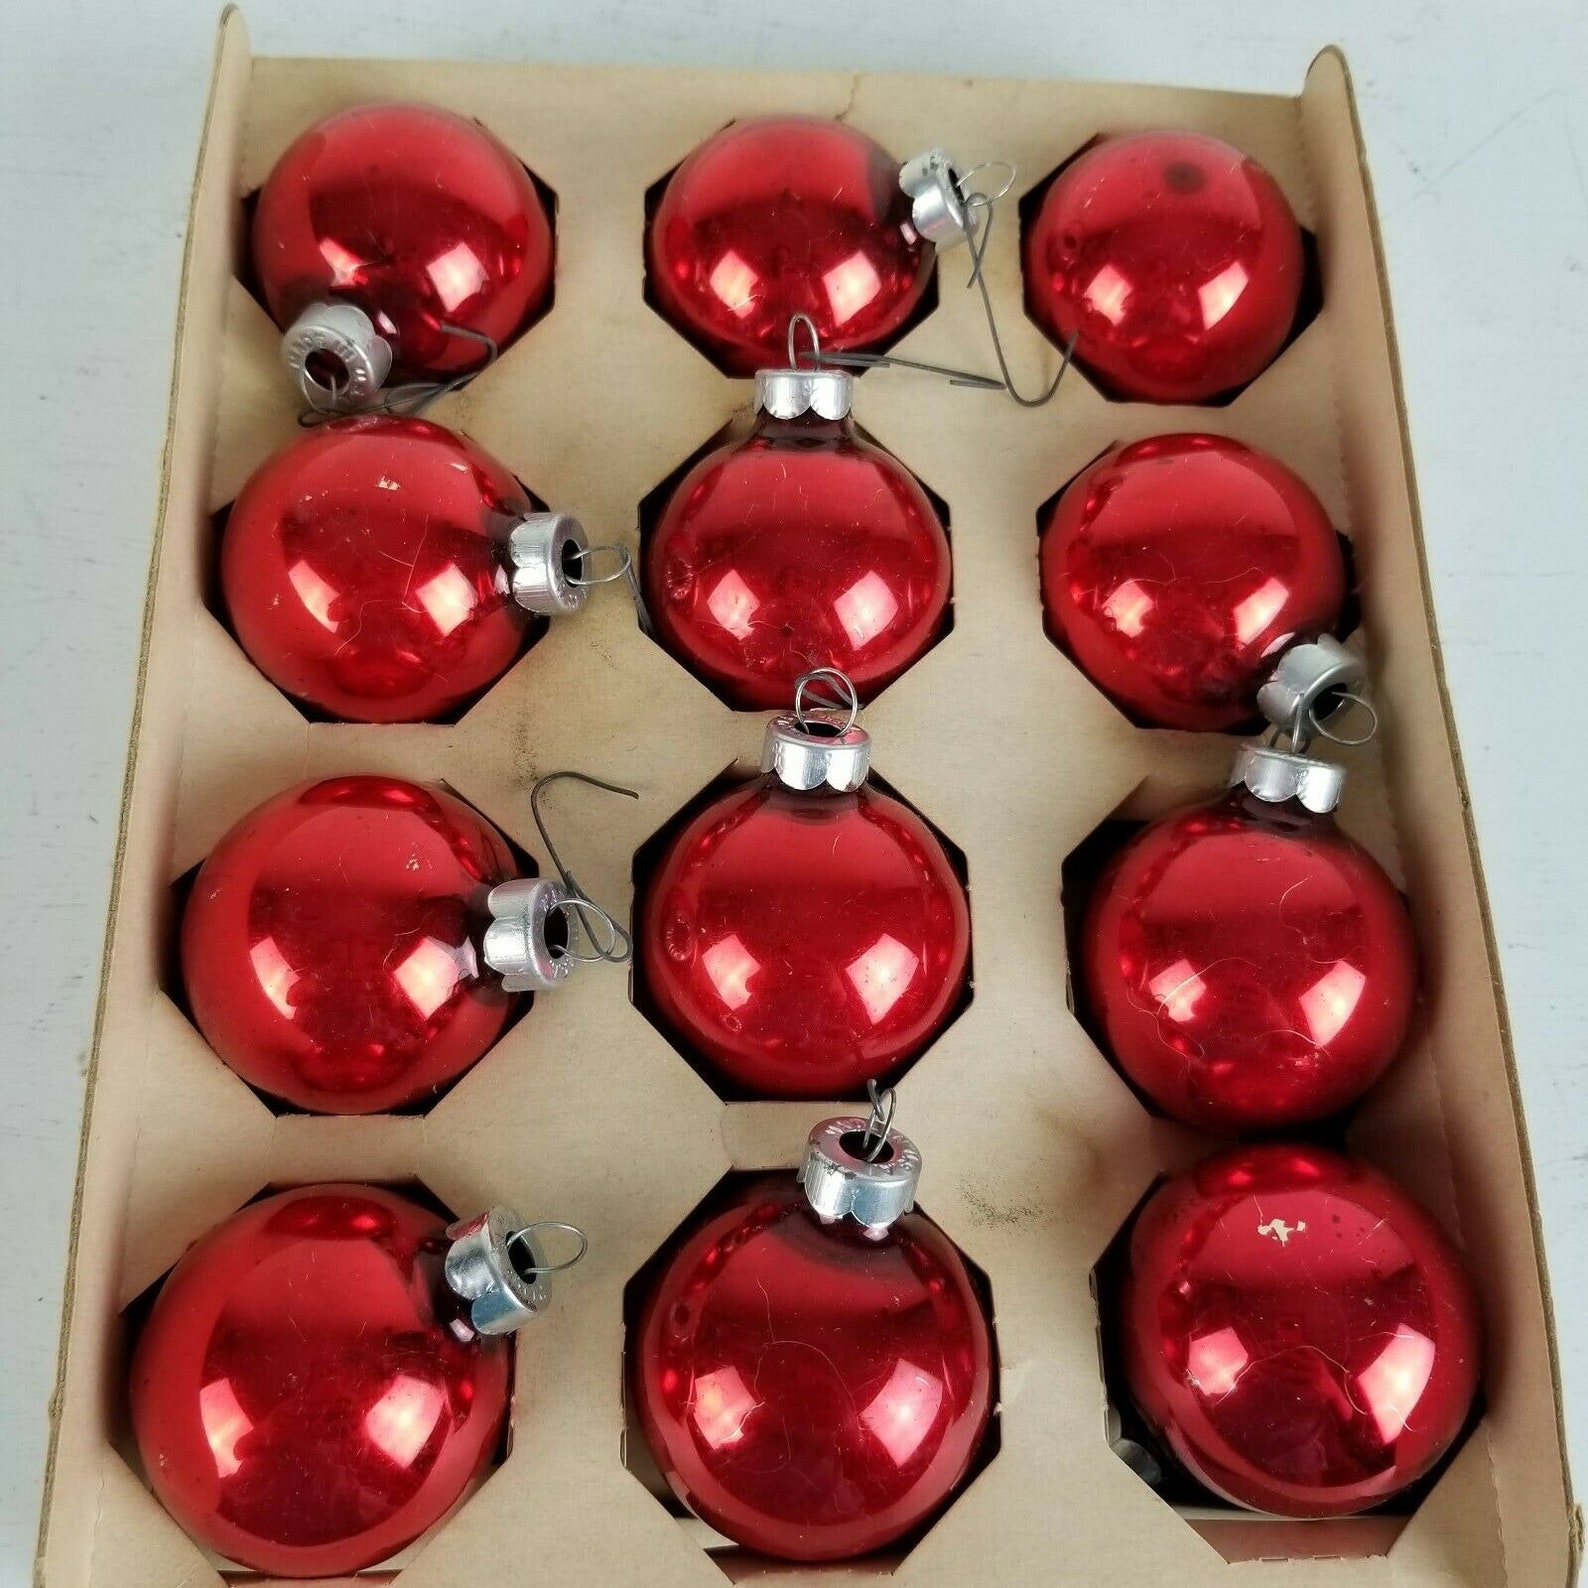 Vintage Glass Christmas Ornaments Set of 12 Red Round Balls | Etsy